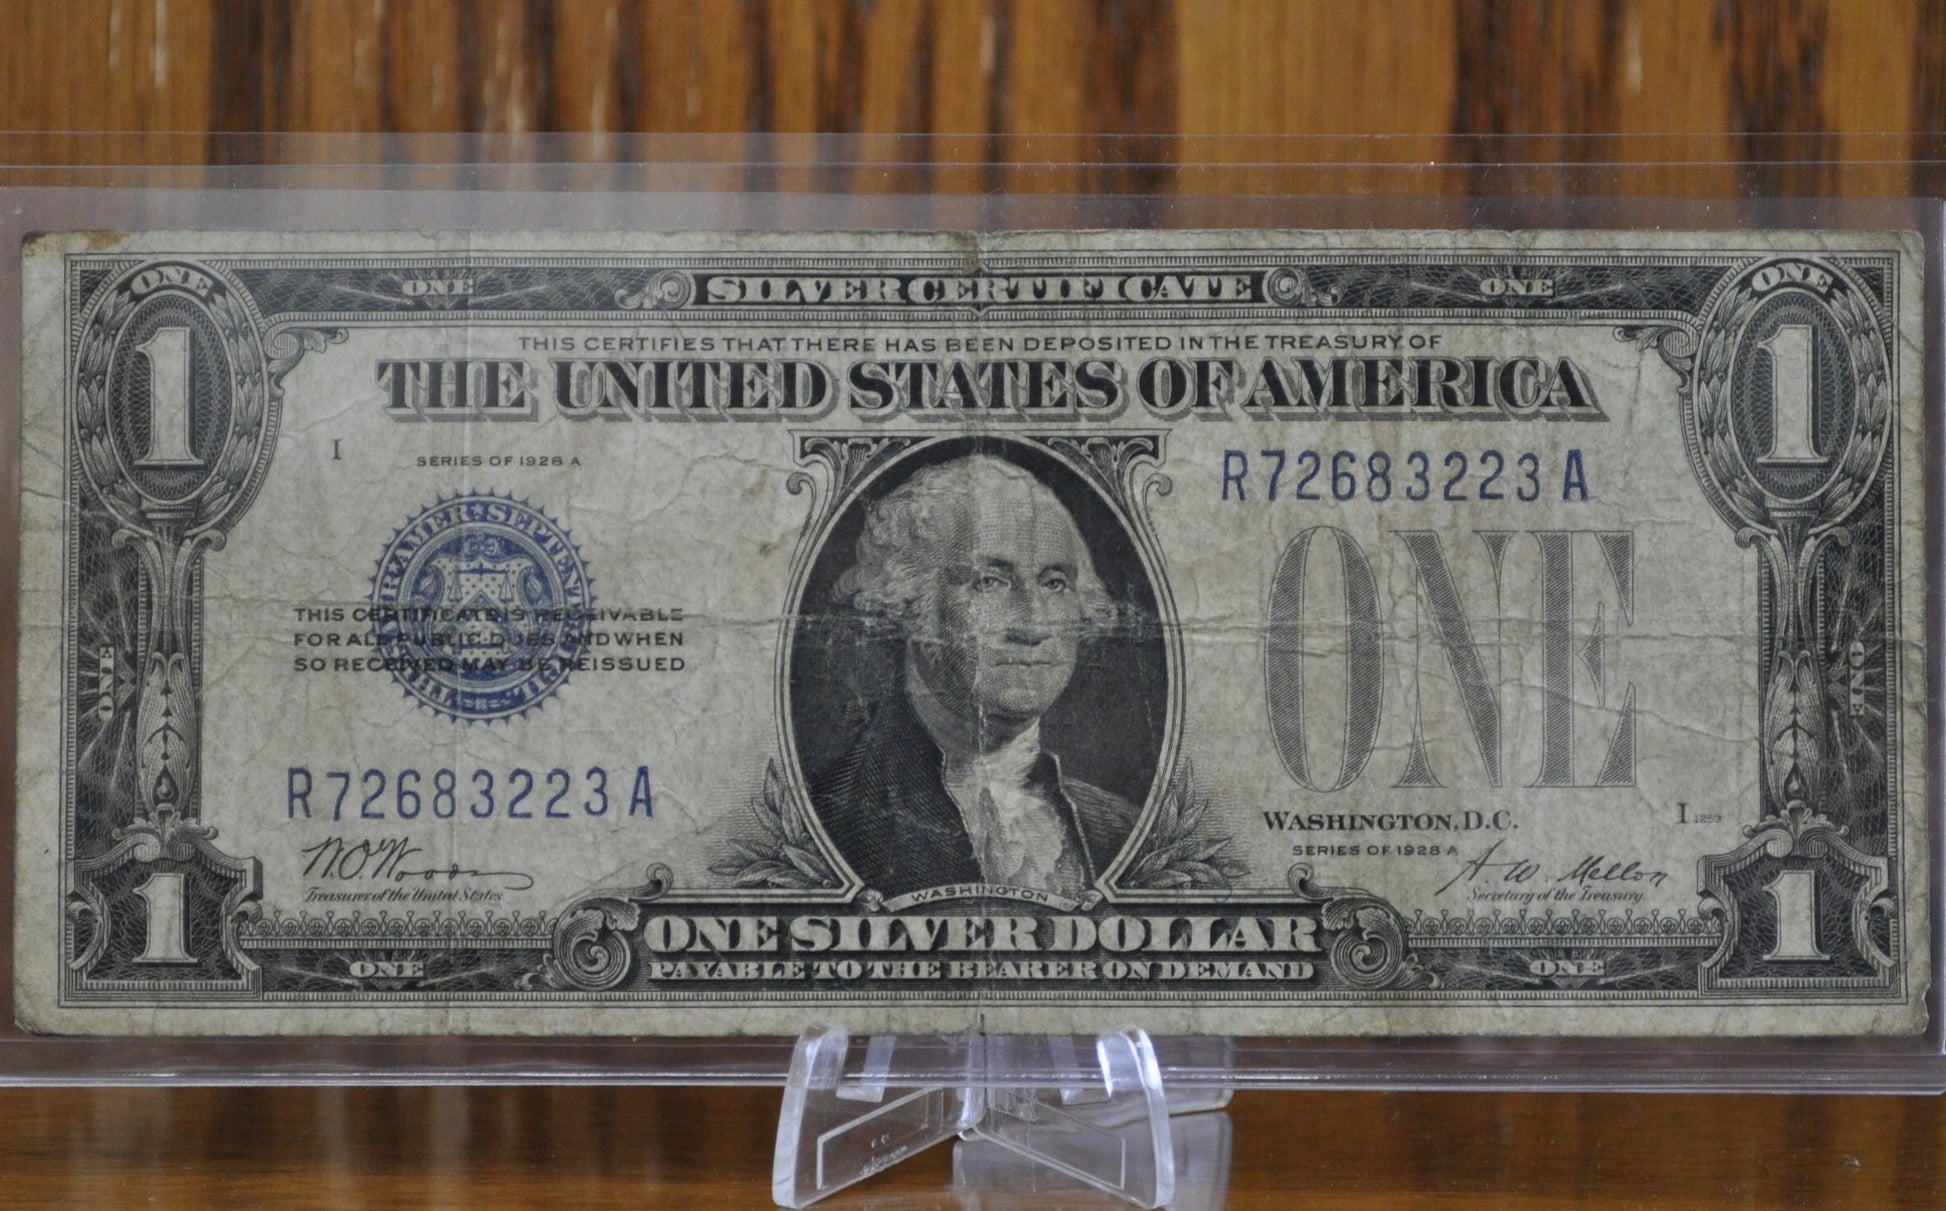 1928 1 Dollar Silver Certificate - G/VG (Good / Very Good) Grade / Condition - 1928 One Dollar Silver Certificate Funny Back Note